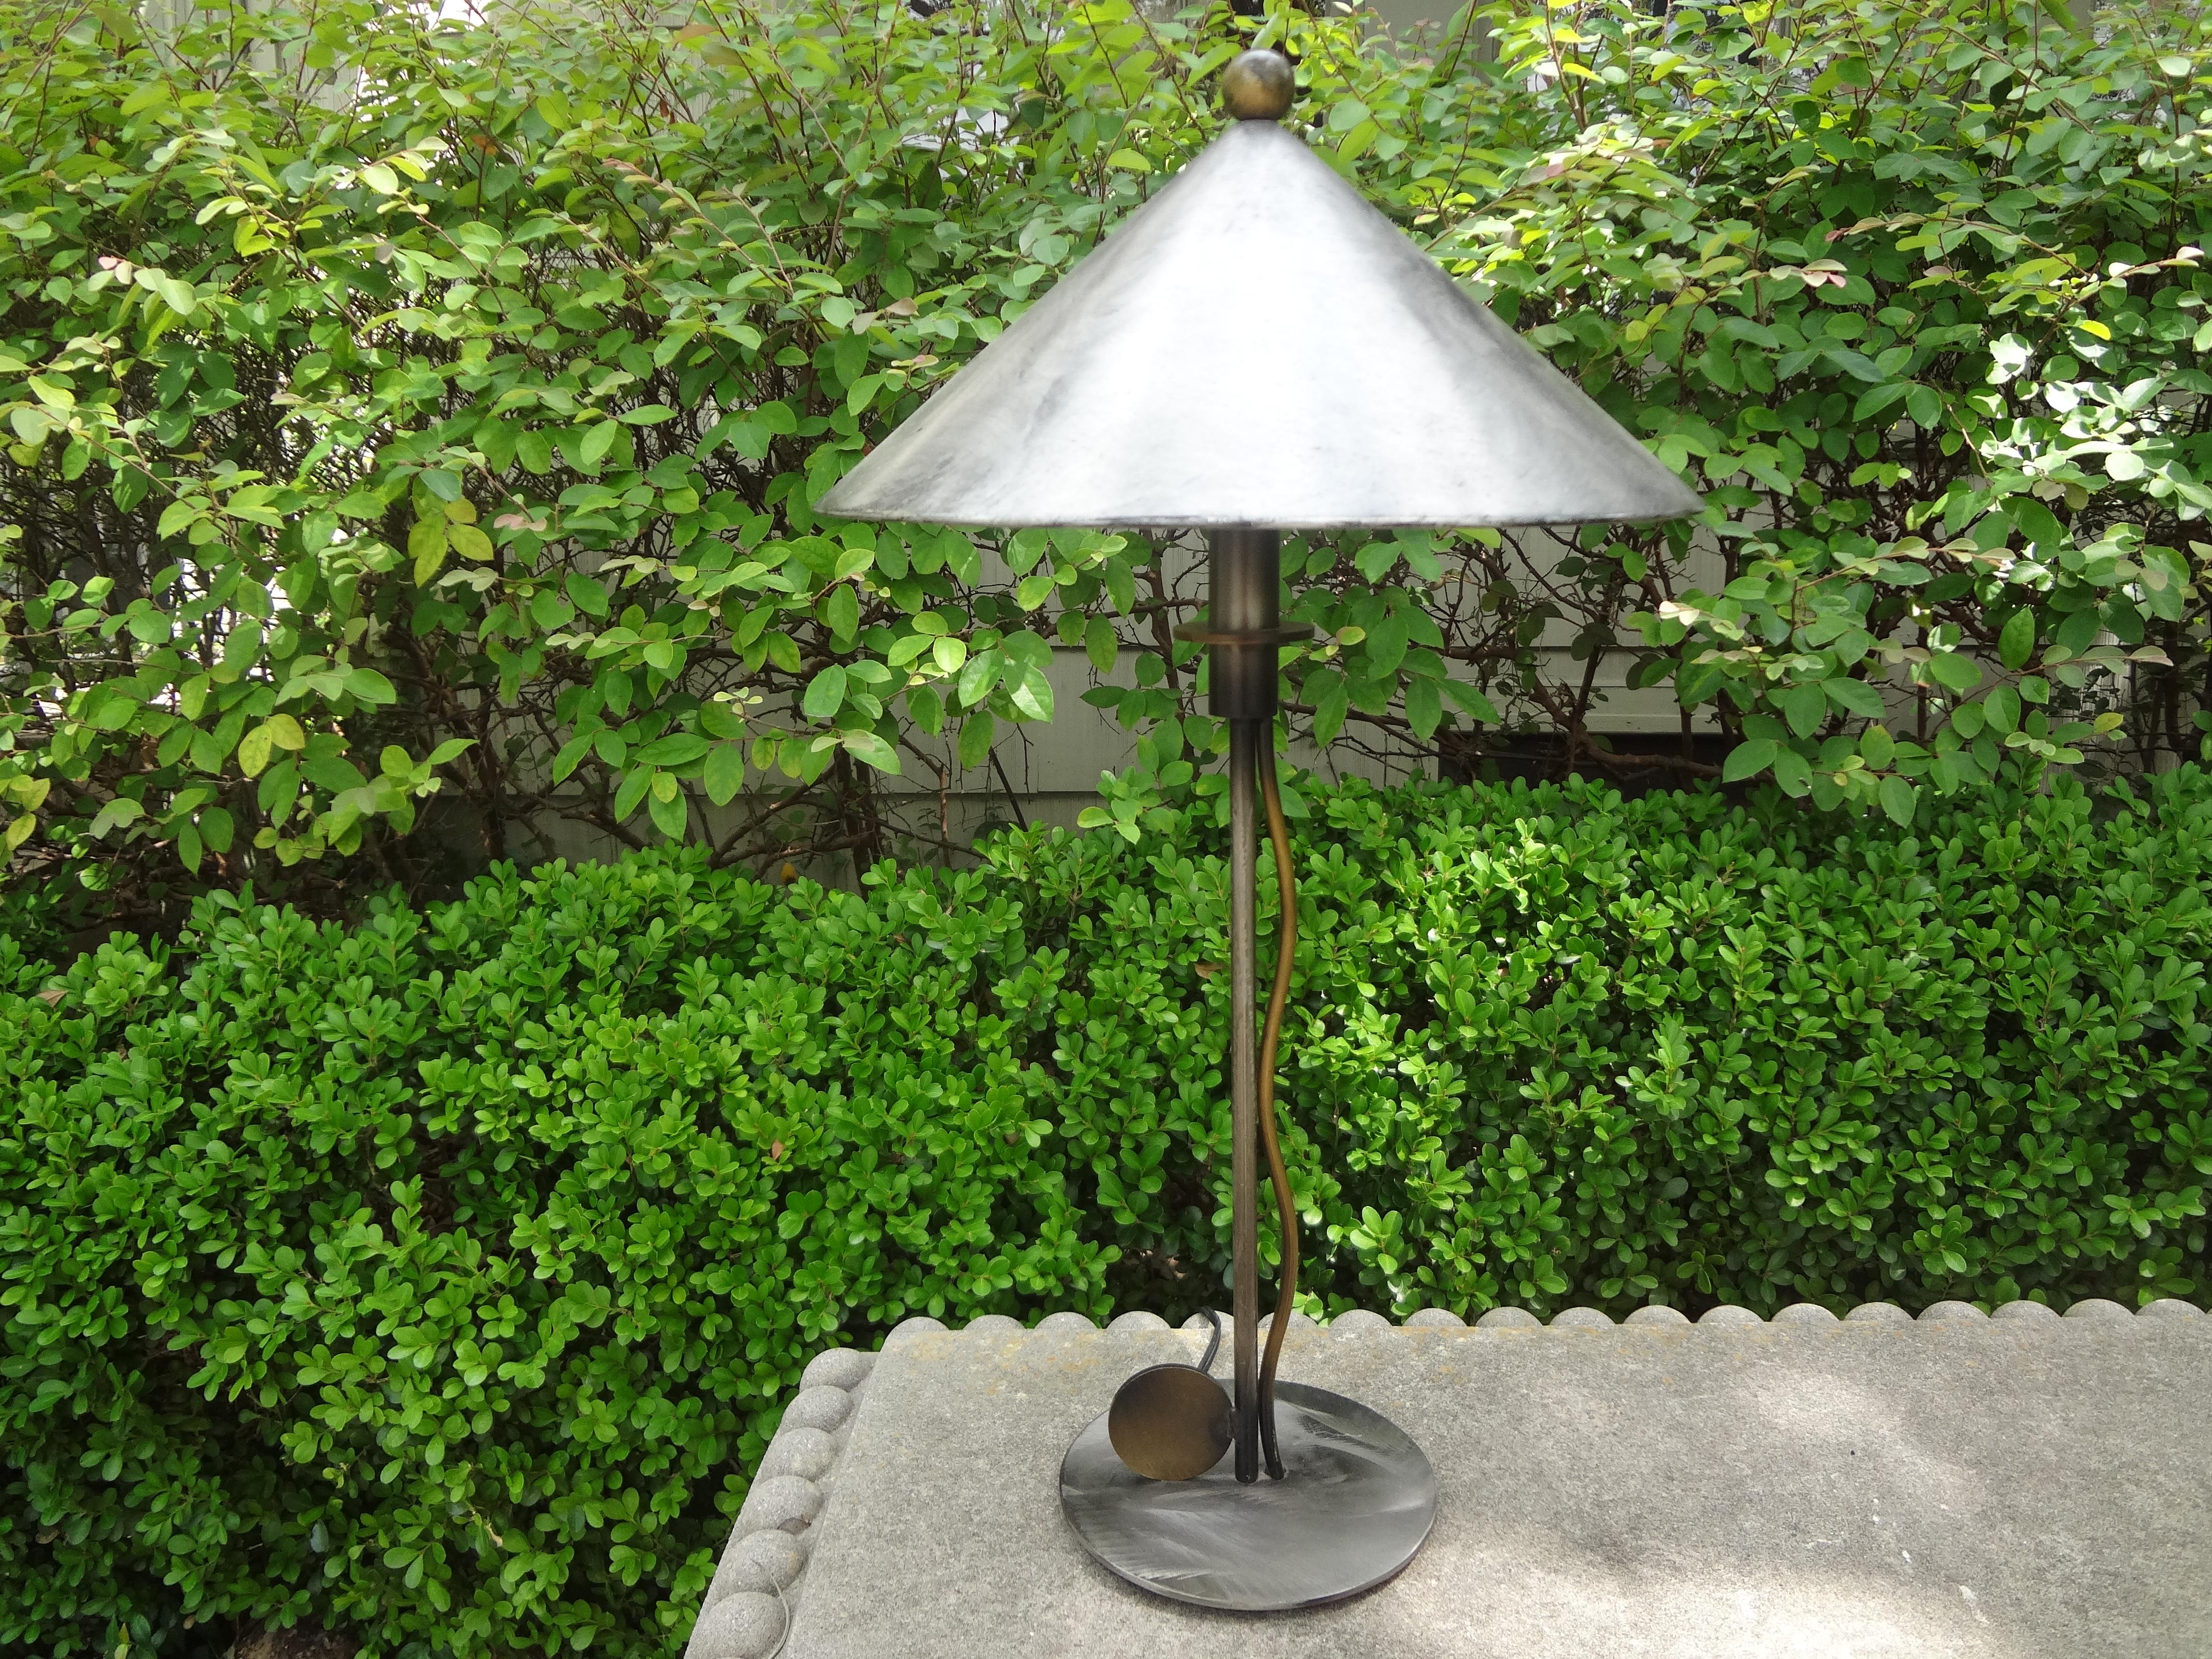 Robert Sonneman steel and brass lamp.
Handsome late 20th century steel and brass table lamp or desk lamp by Robert Sonneman. This unusual lamp is geometric in design with a cone shaped shade and a glass light diffuser.